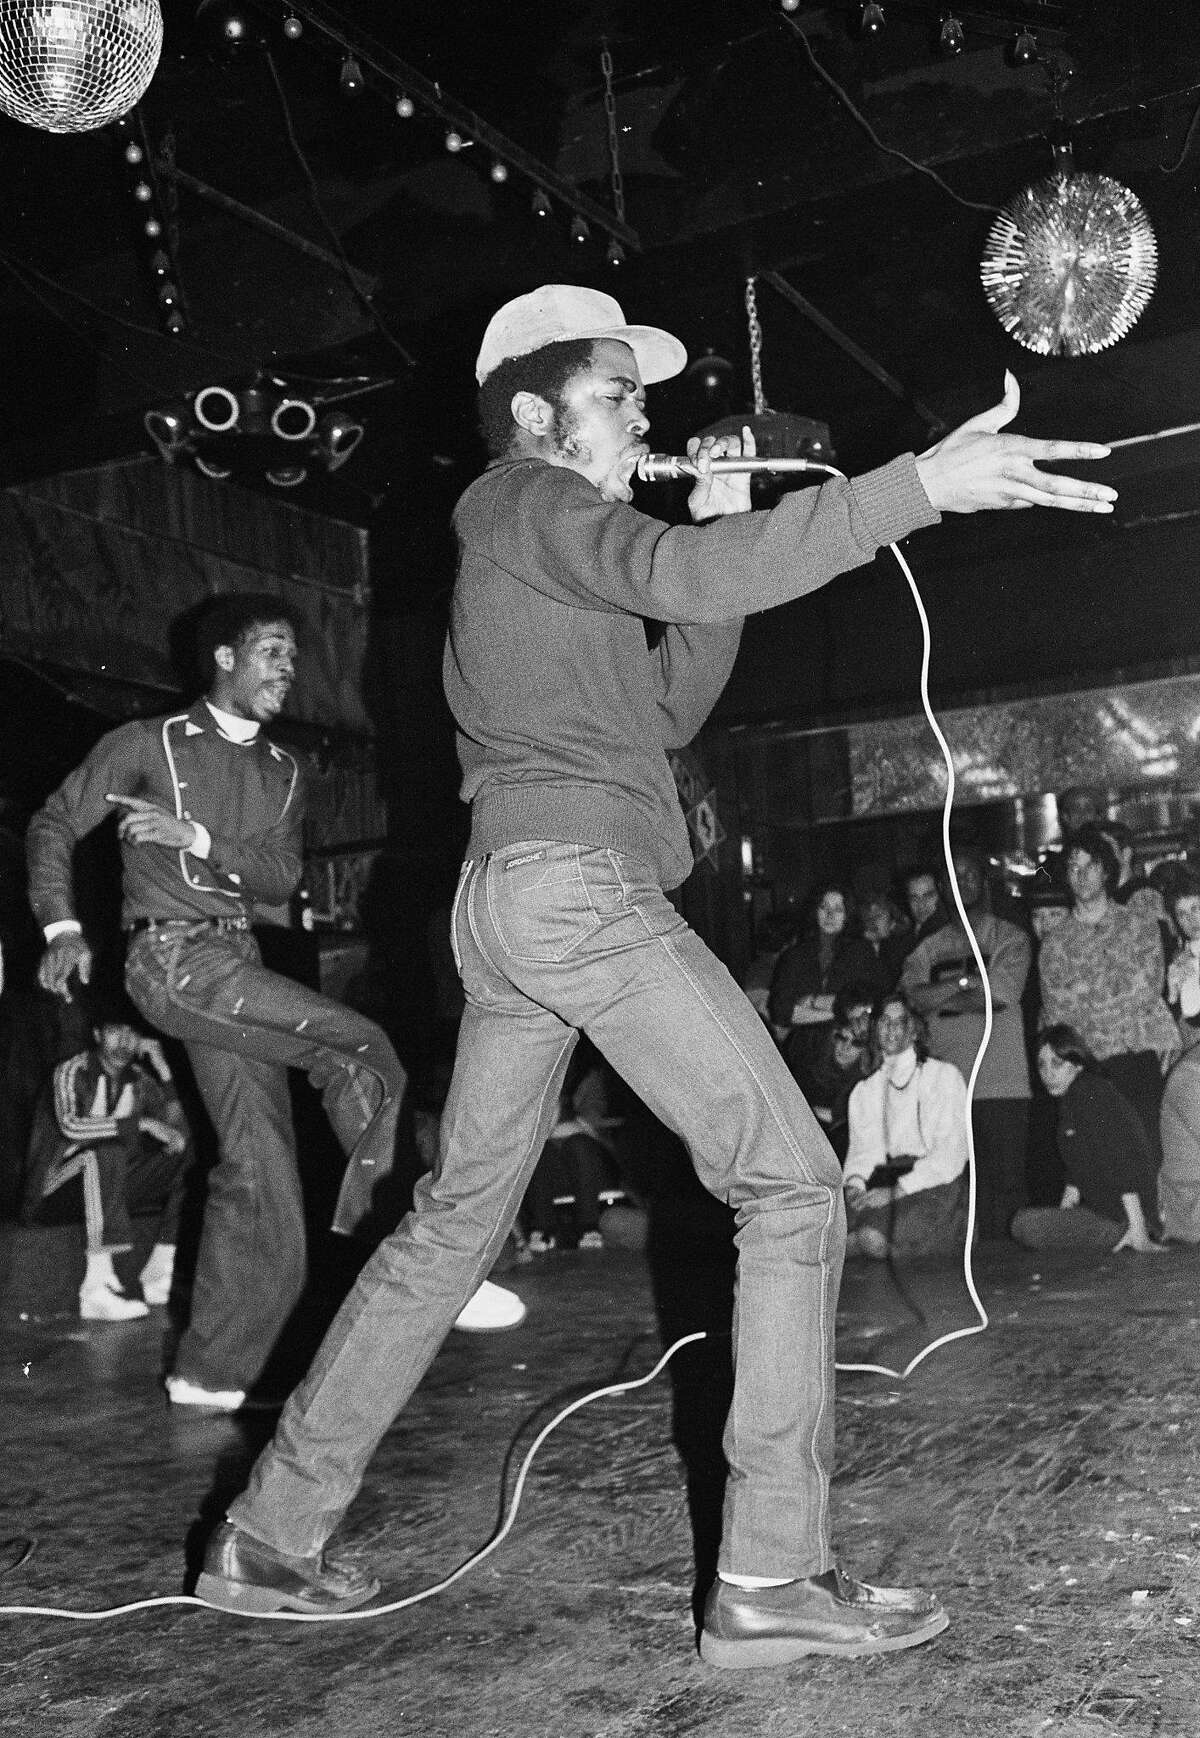 Oakland Museum of California presents "Respect: Hip-Hop Style & Wisdom," Joe Conzo, JDL (Jerry D. Lewis) of Cold Crush Brothers at Club Negril, 1981. Photo print. Courtesy of the Joe Conzo Archives.